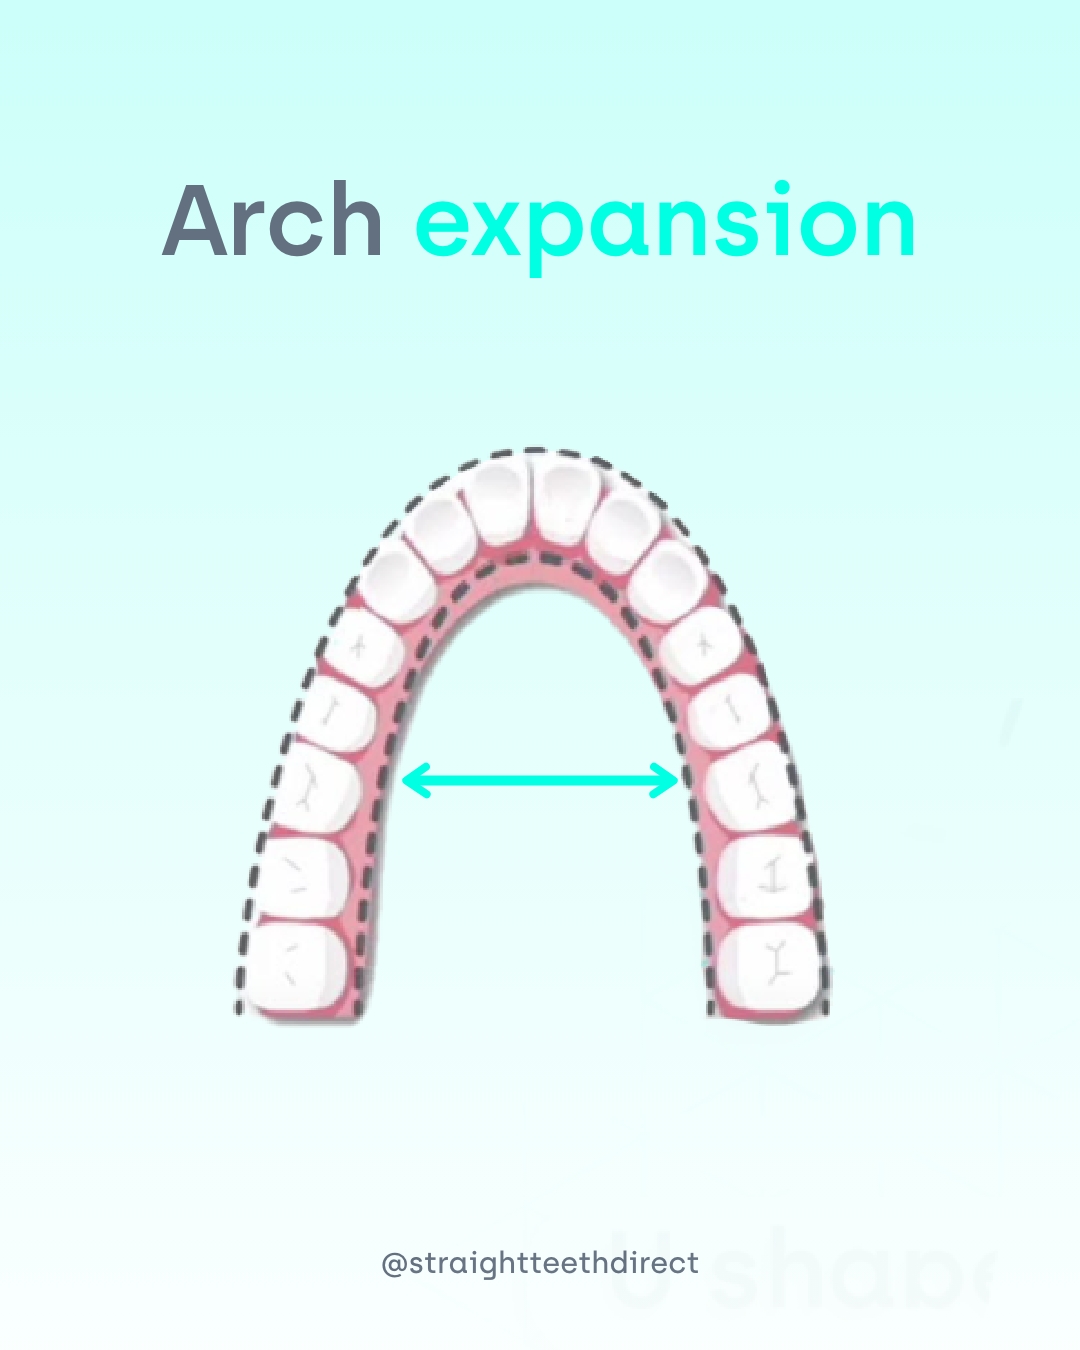 Arch expansion